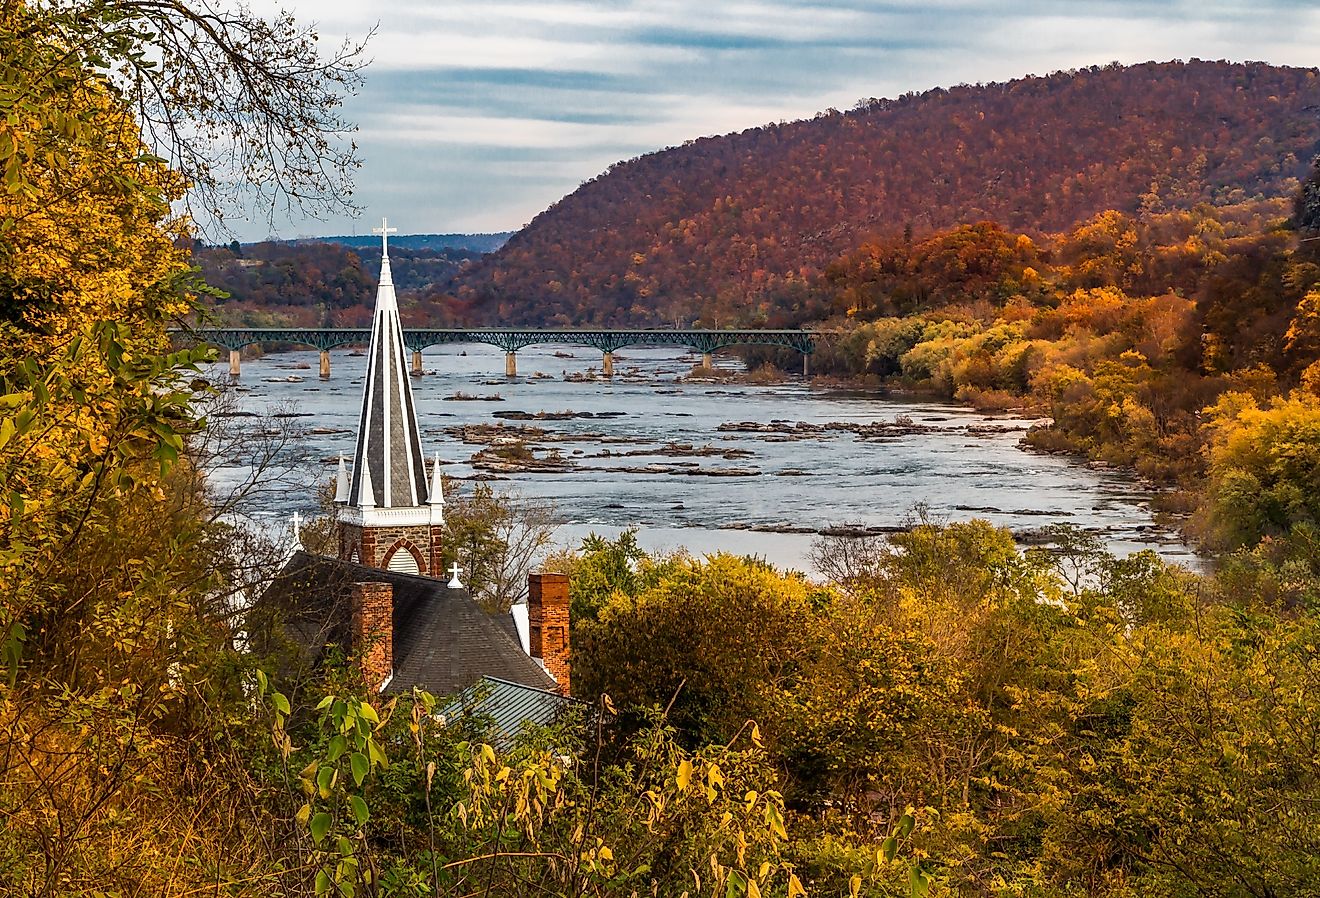 St. Peter's Roman Catholic Church in Harpers Ferry, West Virginia as it overlooks the Shenandoah River in the fall.